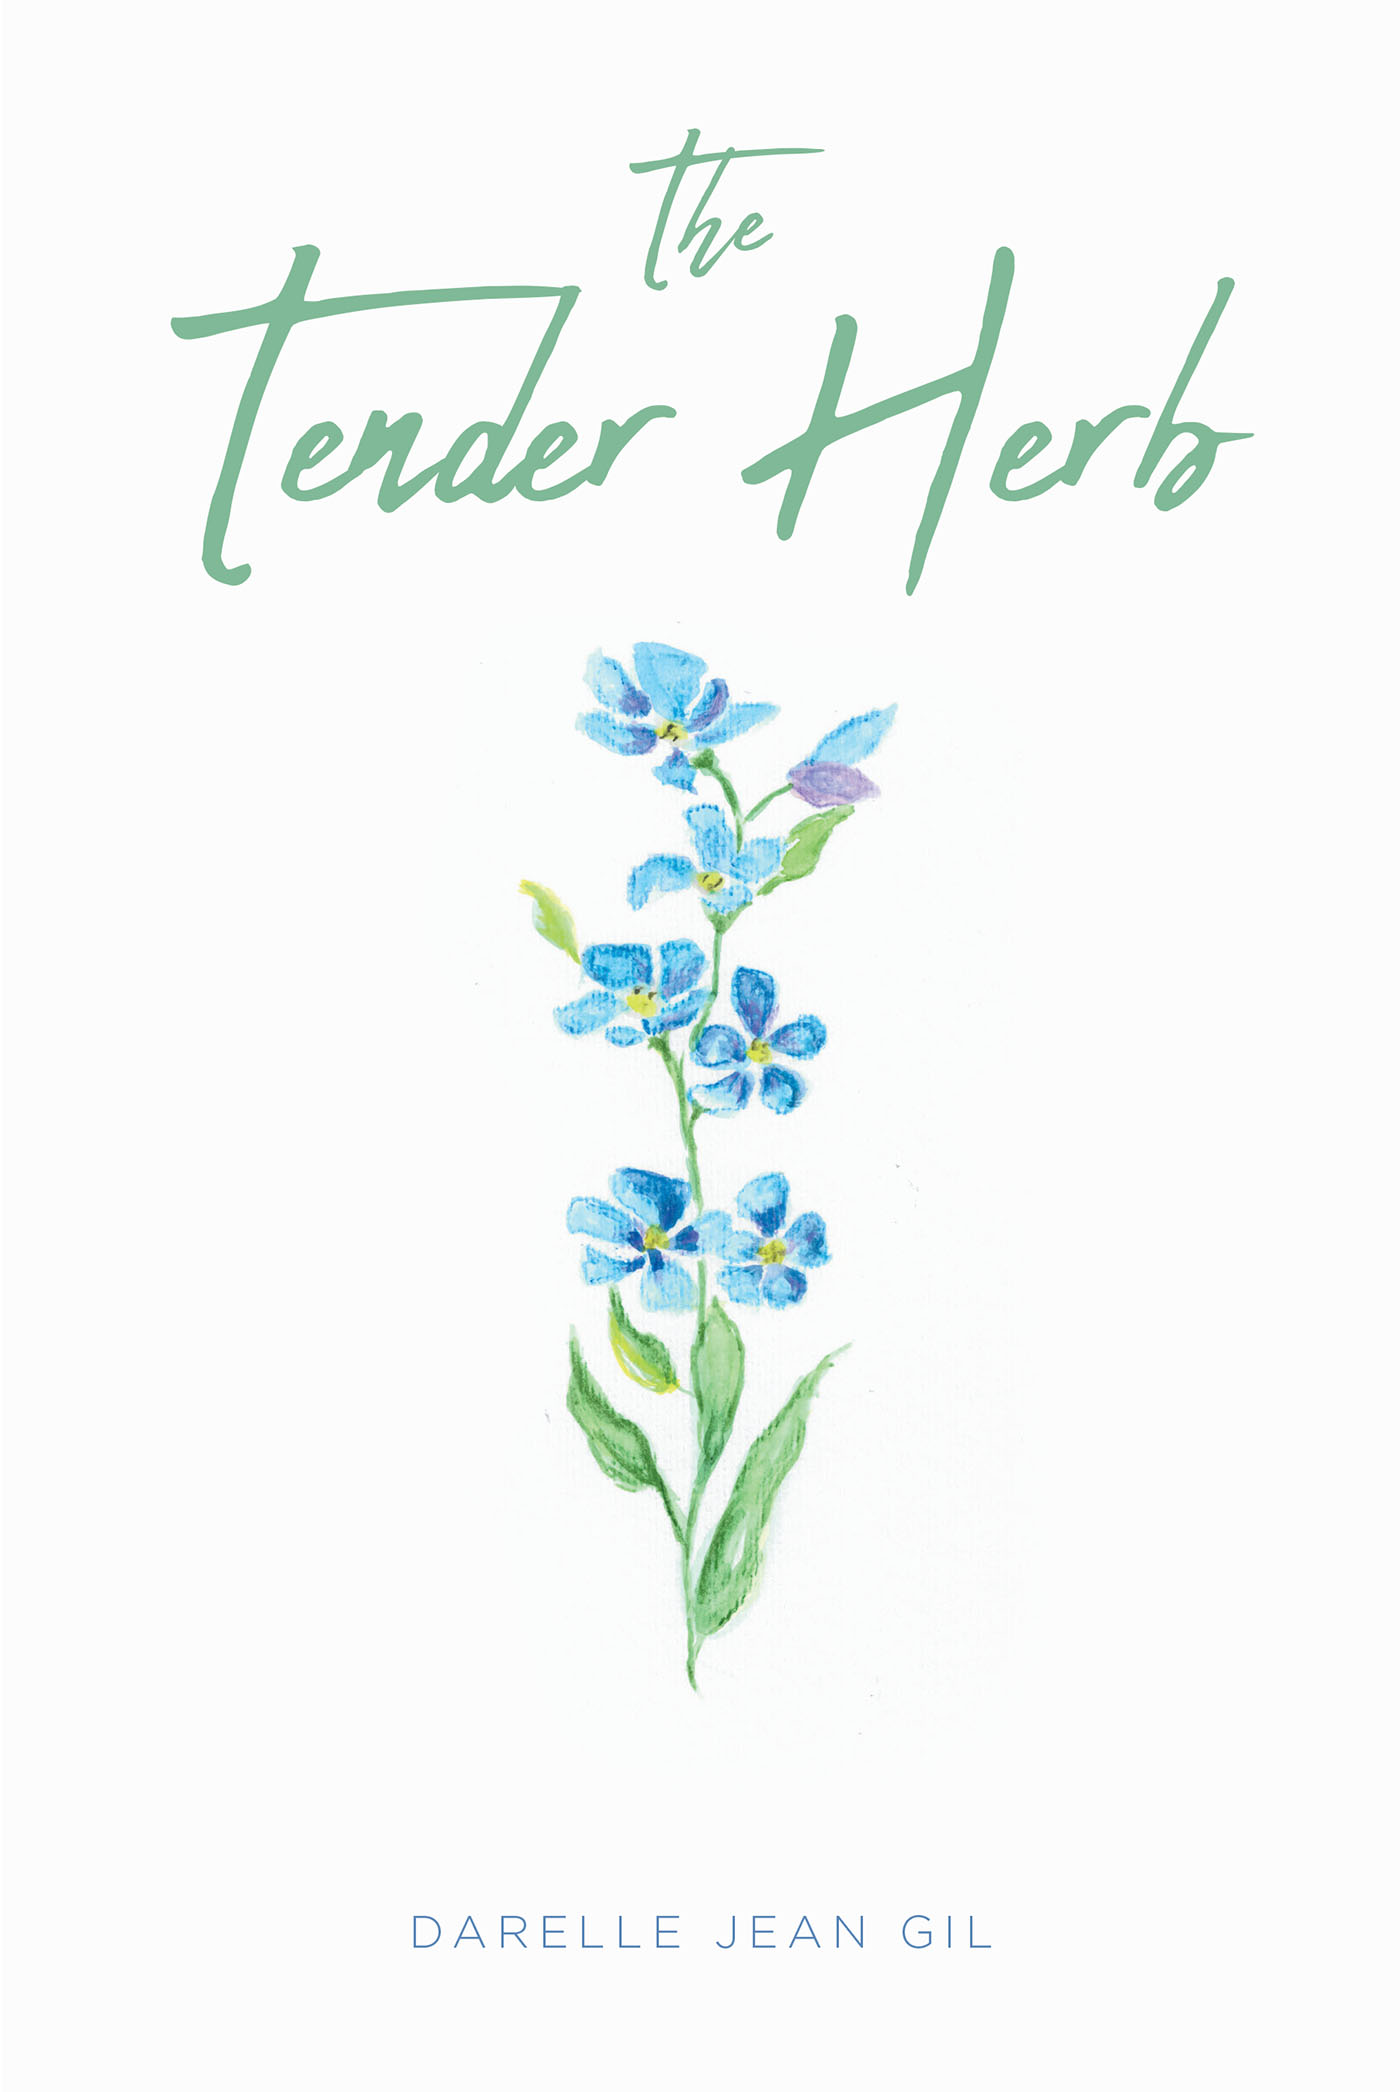 Darelle Jean Gil’s Newly Released "The Tender Herb" is a Heartwarming Anthology That Offers Comfort, Hope, and Encouraging Faith